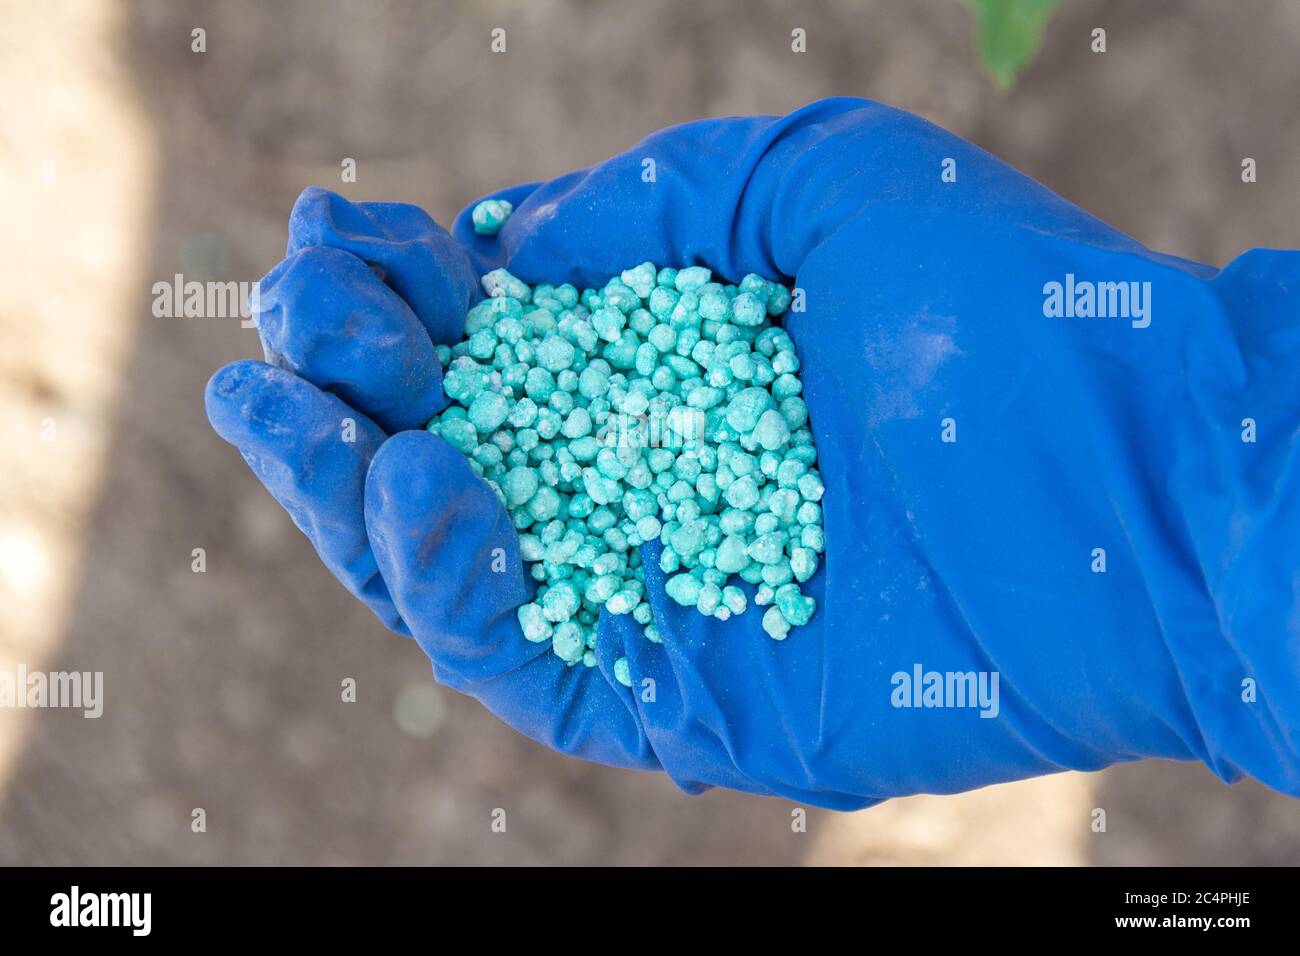 Blue different shape chemical fertilizer granules in human's hand. Stock Photo